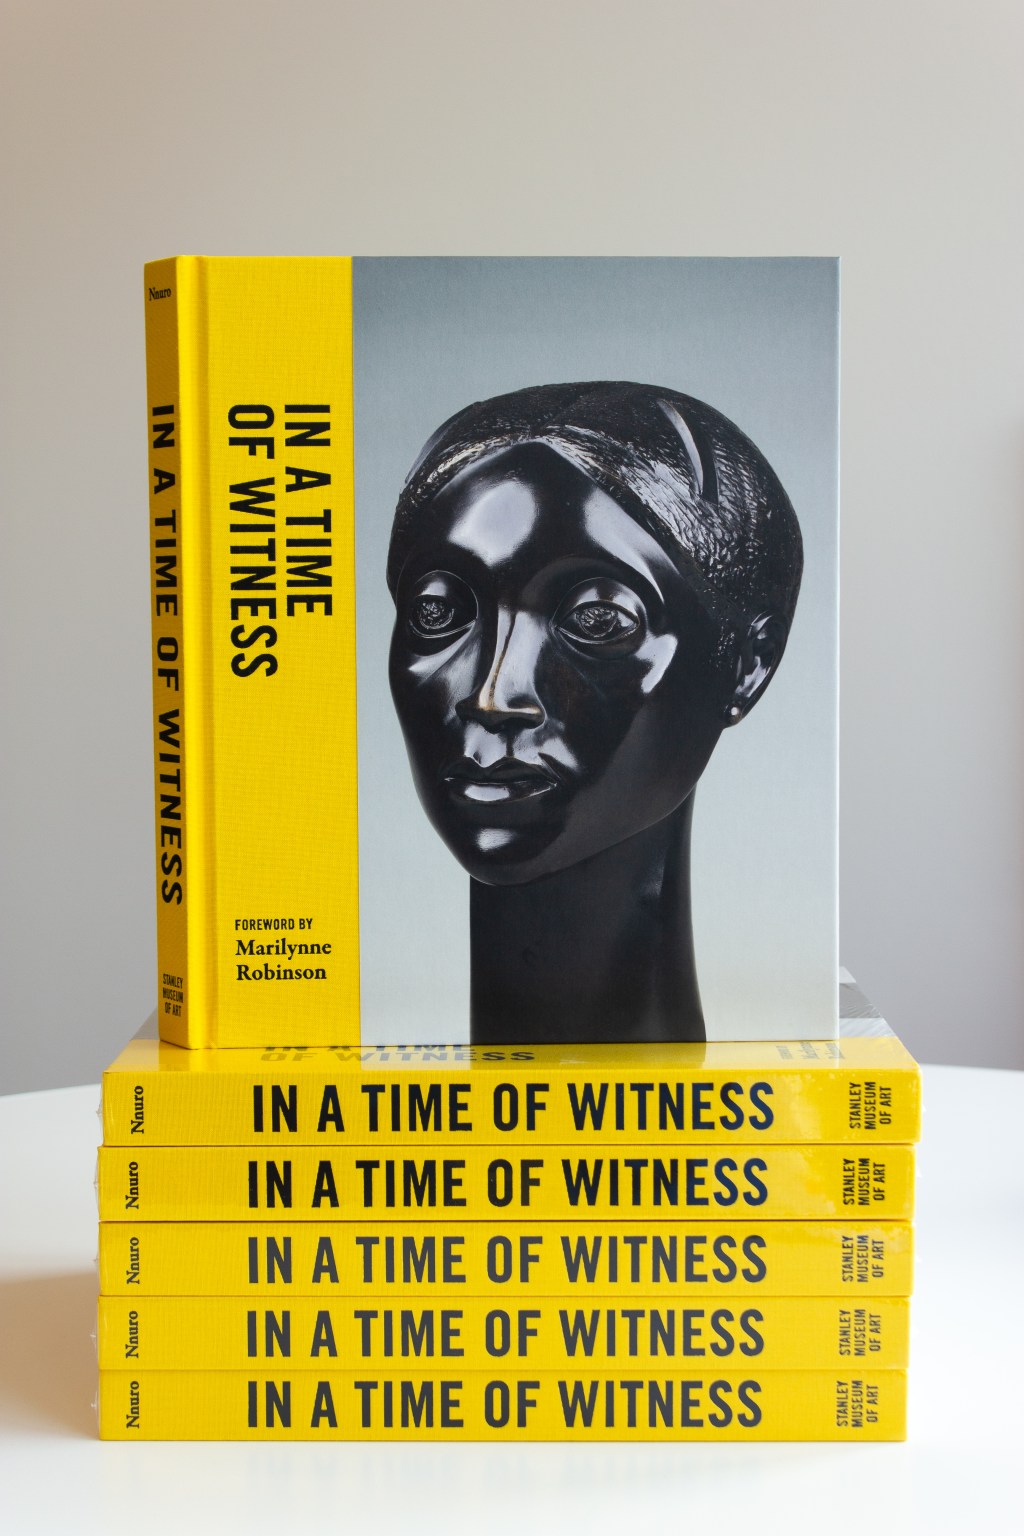 A stack of books with the title "In a Time of Witness" on the spine and cover, advertising a foreword by Marilynne Robinson and featuring a black sculpture of a human face